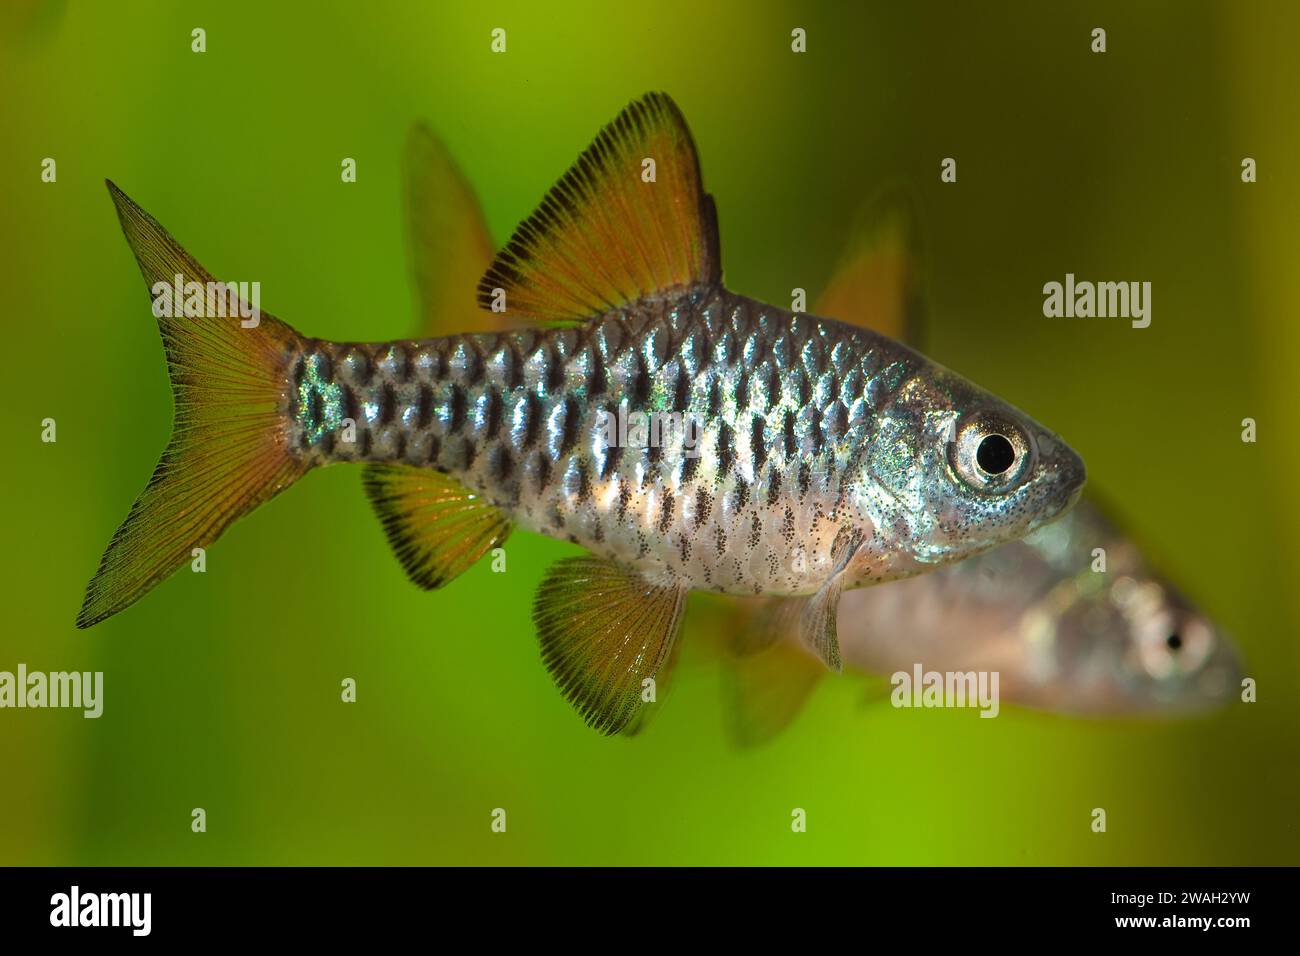 Checkered barb, Checkerboard, Island barb (Oliotius oligolepis, Puntius oligolepis, Capoeta oligolepis), impressing, side view Stock Photo